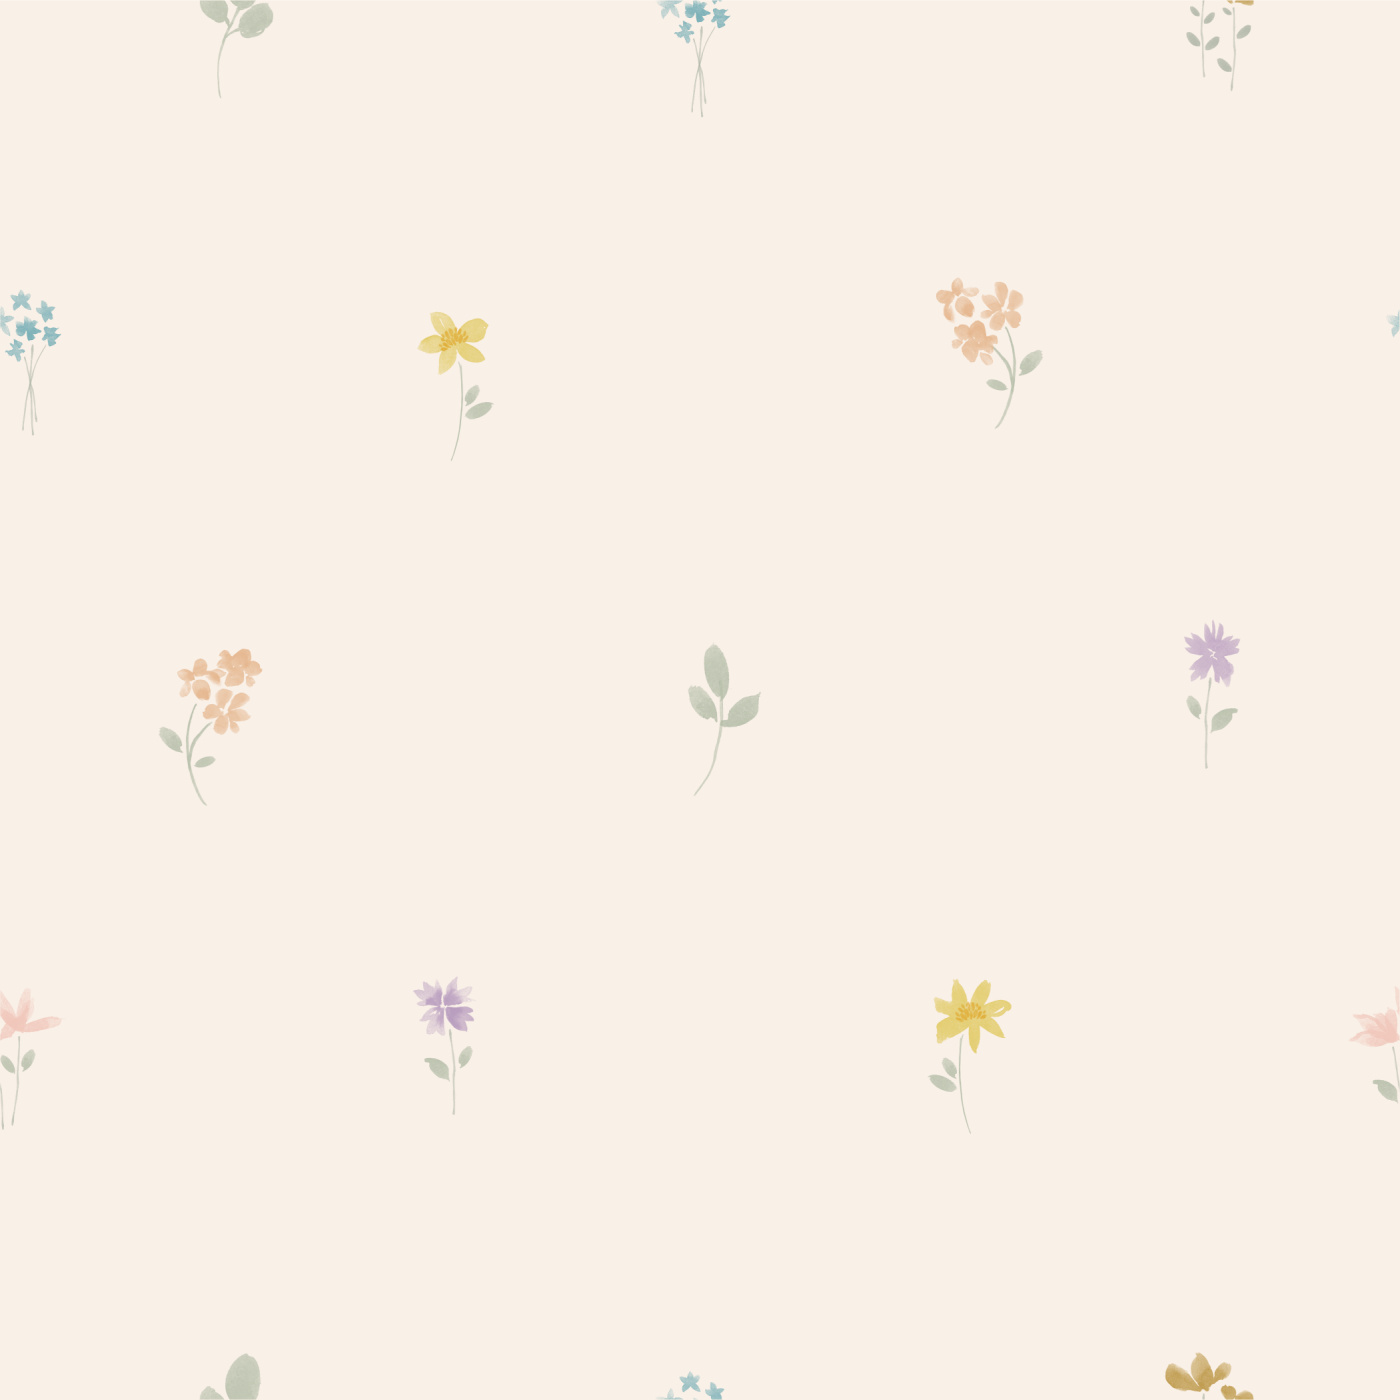 Pressed Flower Collection Wallpaper